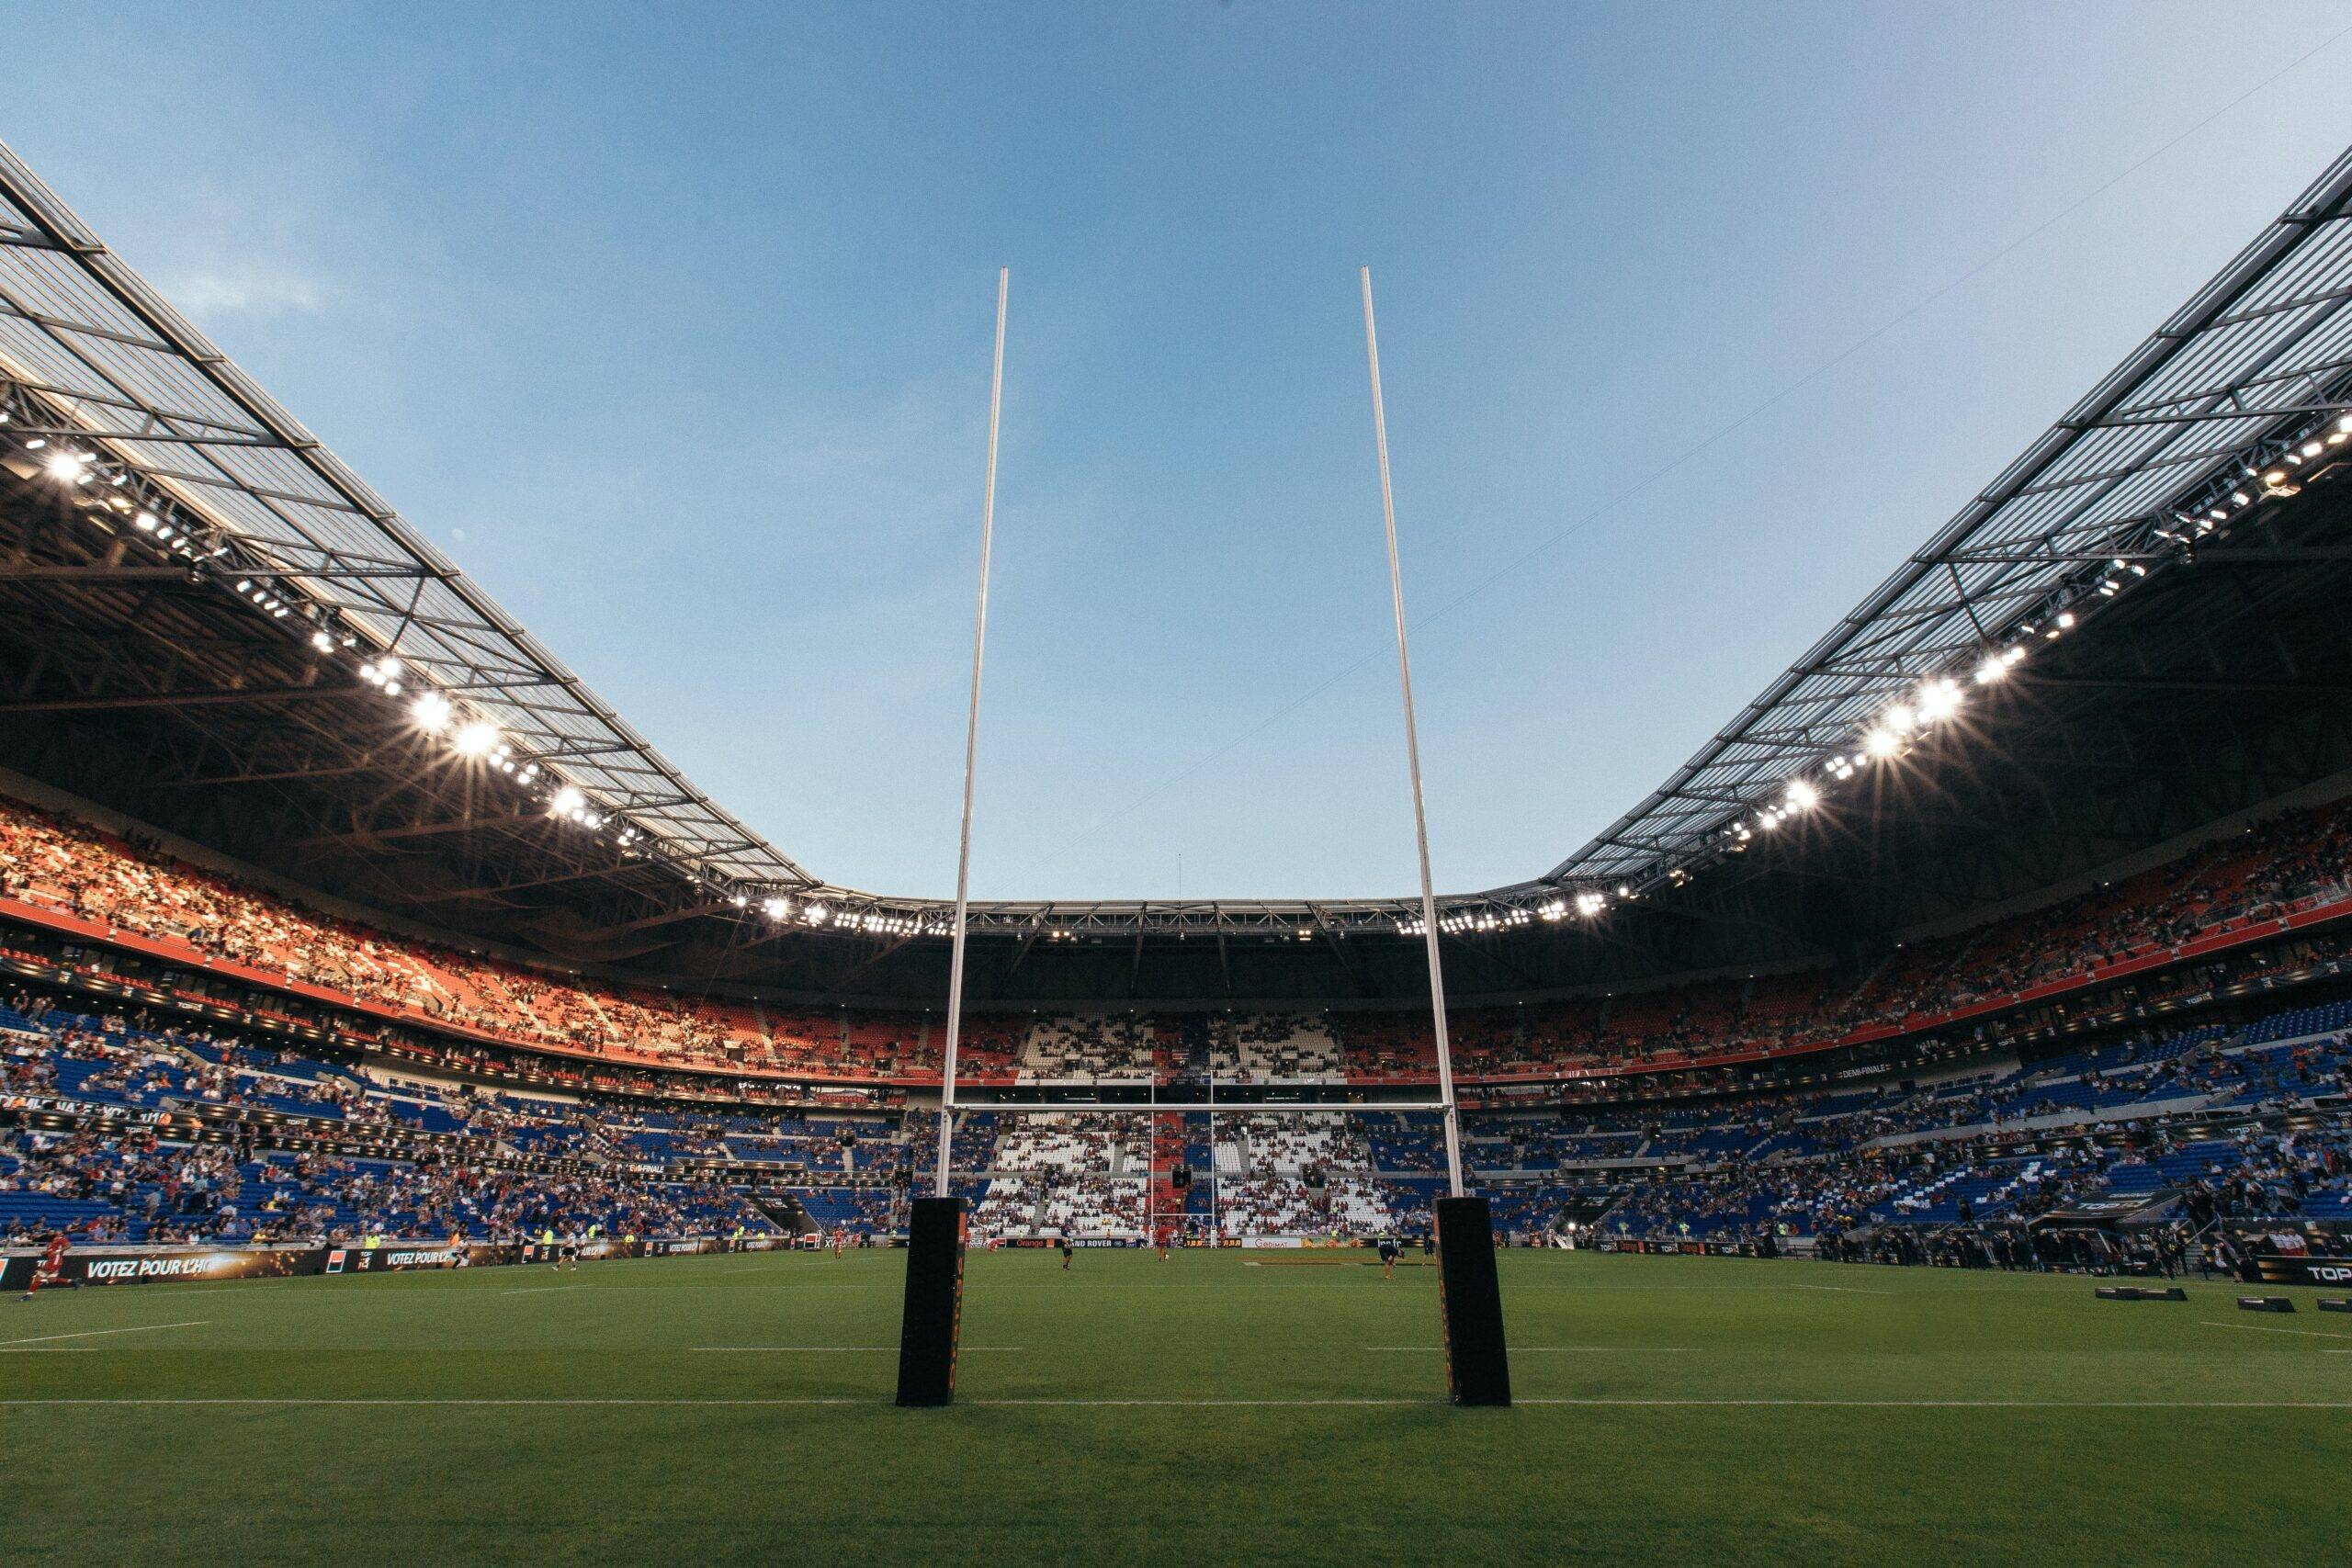 Restaurant industry calls for DStv to review price increases ahead of Rugby World Cup